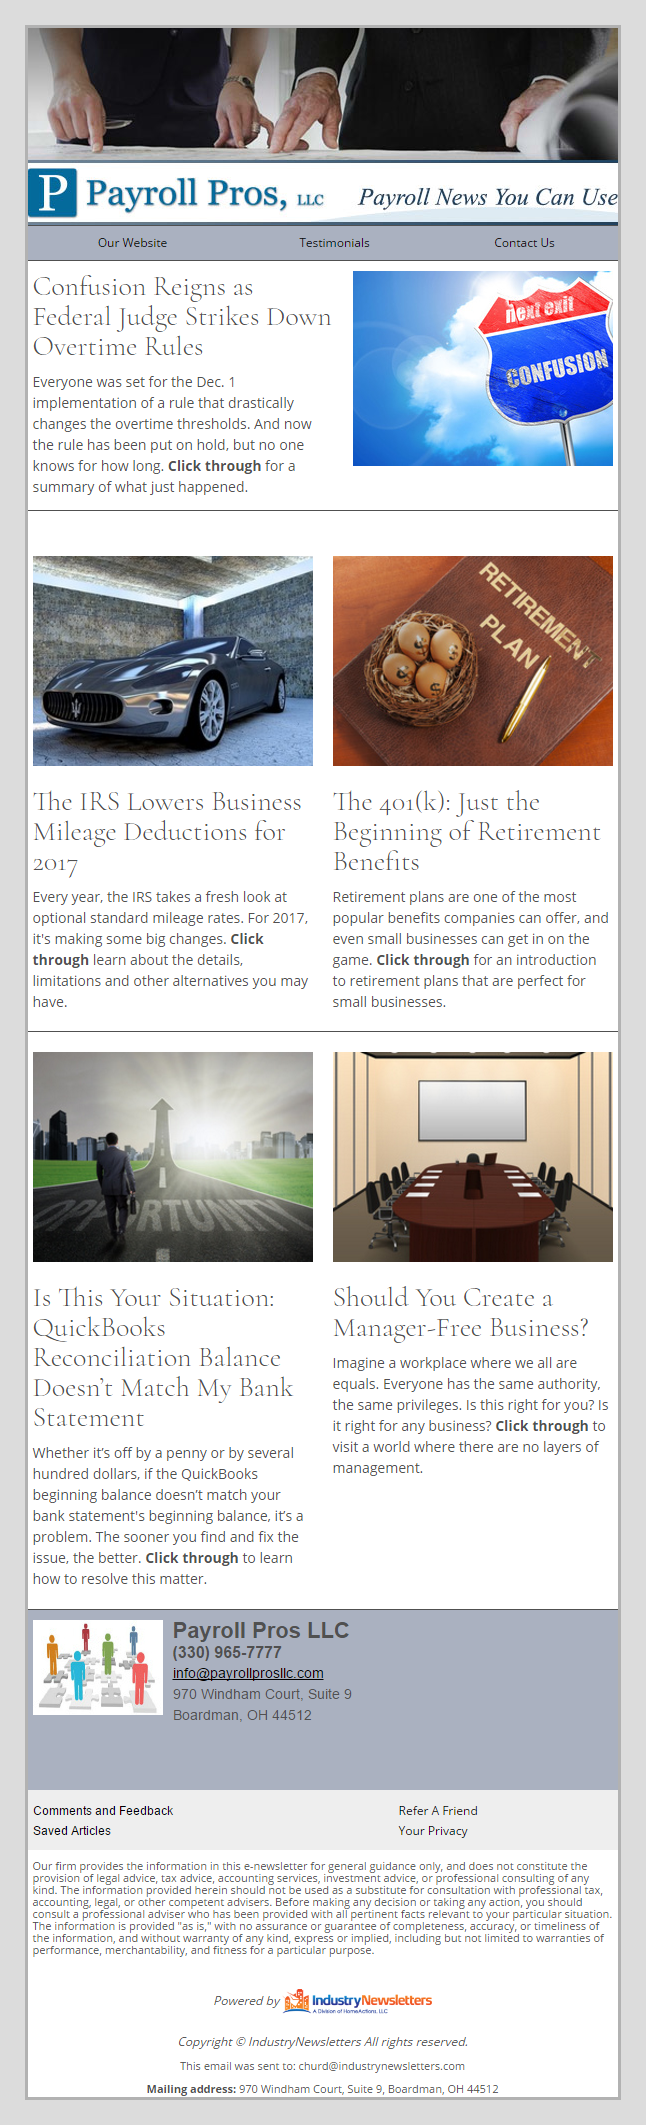  Payroll Pros - IndustryNewsletters Sample Email Newsletter